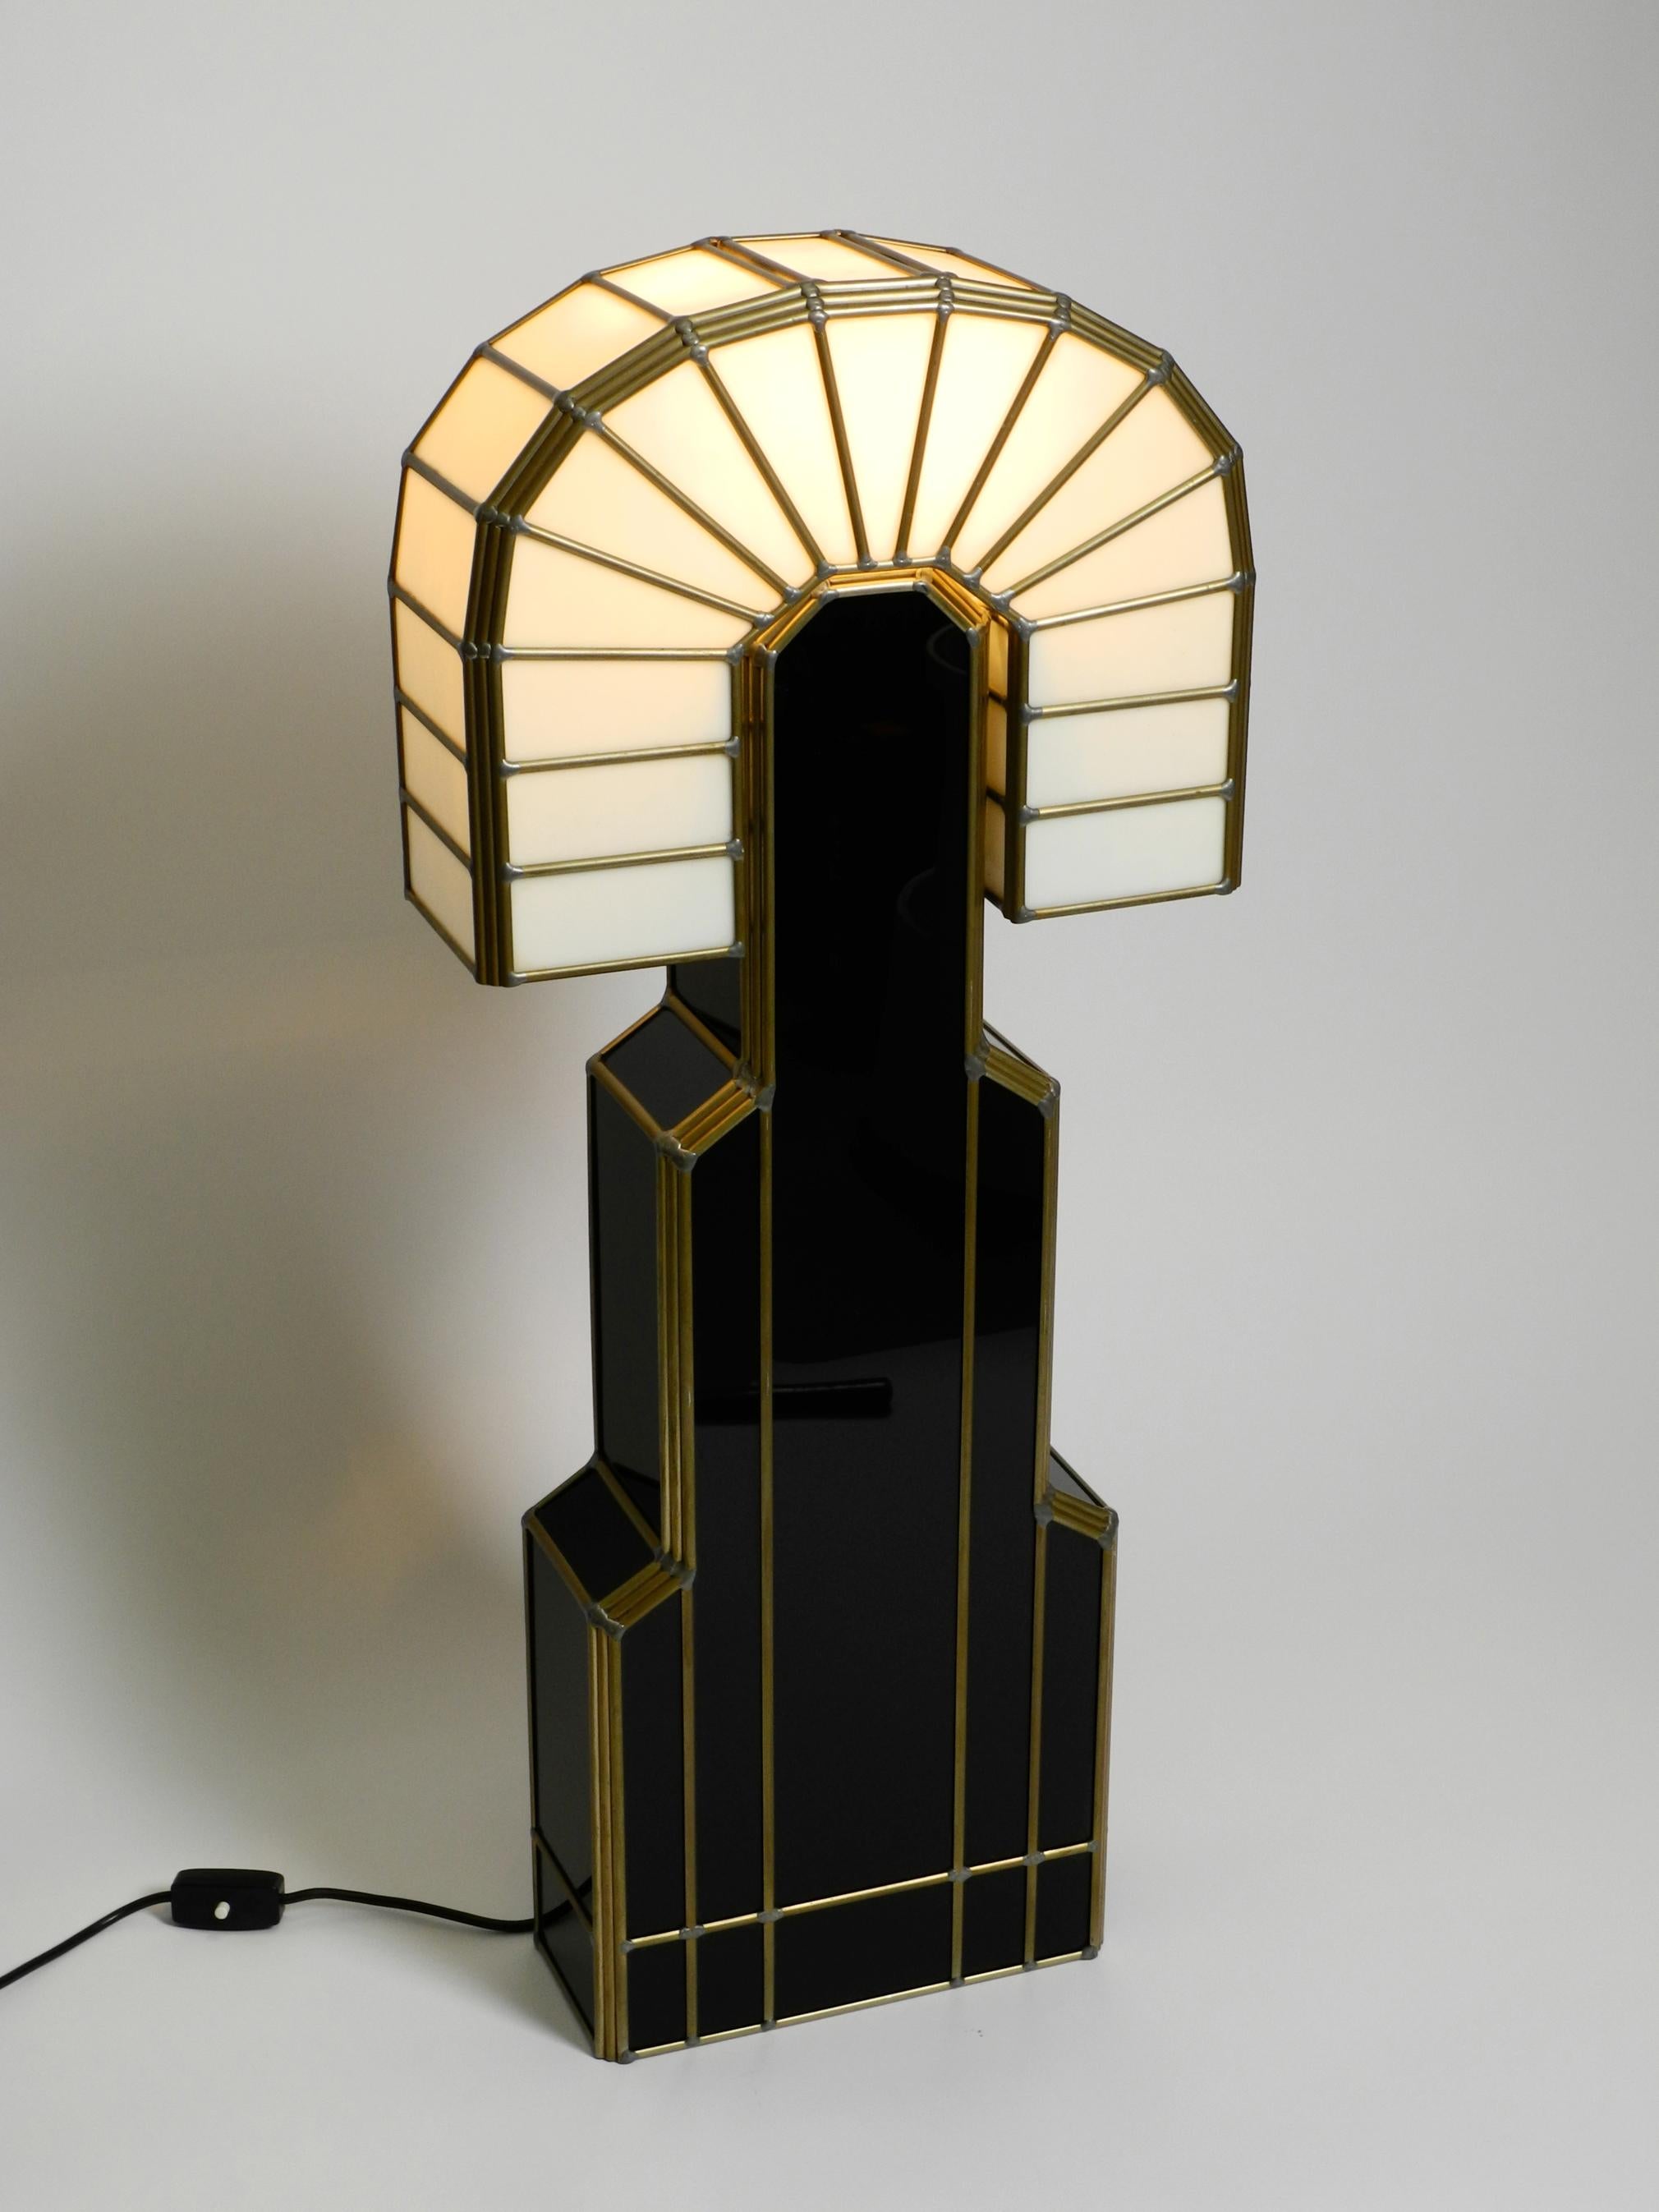 Post-Modern Limited Huge Postmodern Art Deco Tiffany Design Table or Floor Lamp from 1980